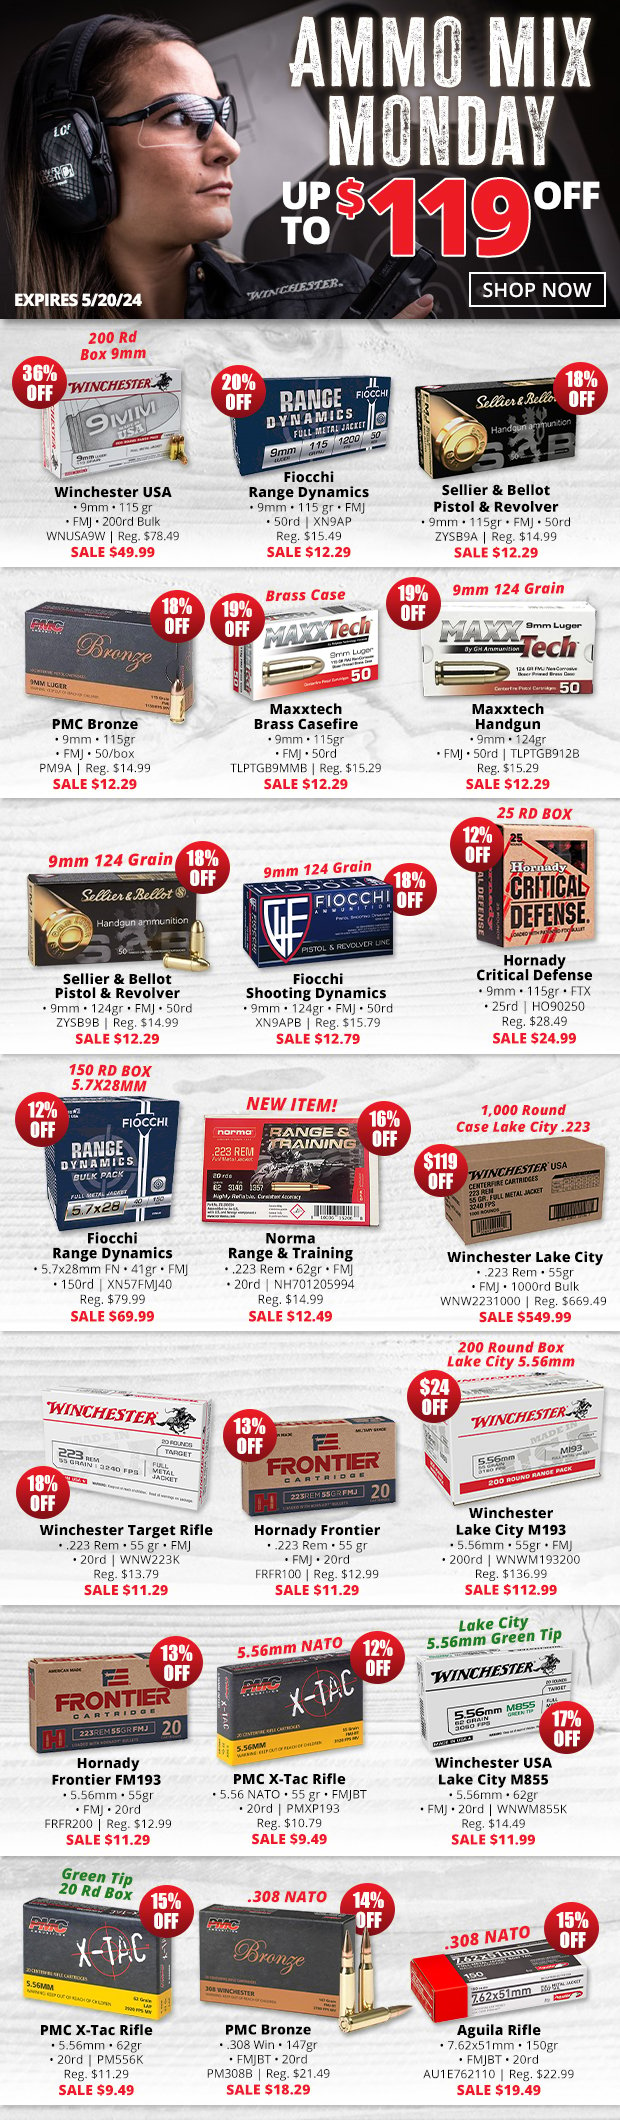 Up to 33% Off Ammo Mix Monday!